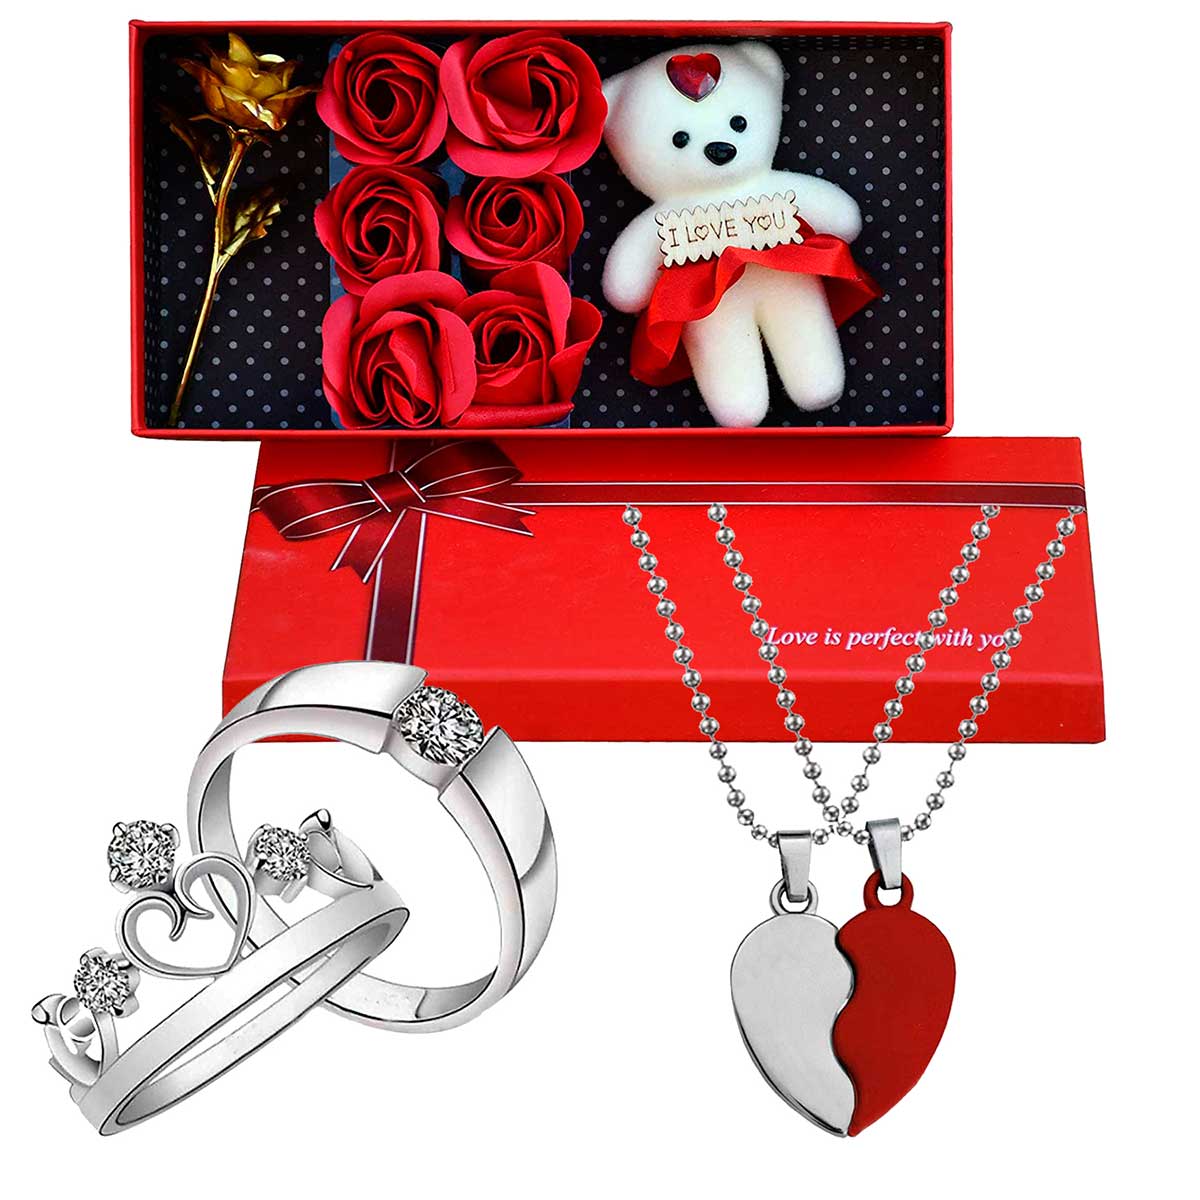 Find The Most Romantic Valentine's Day Gifts for Her